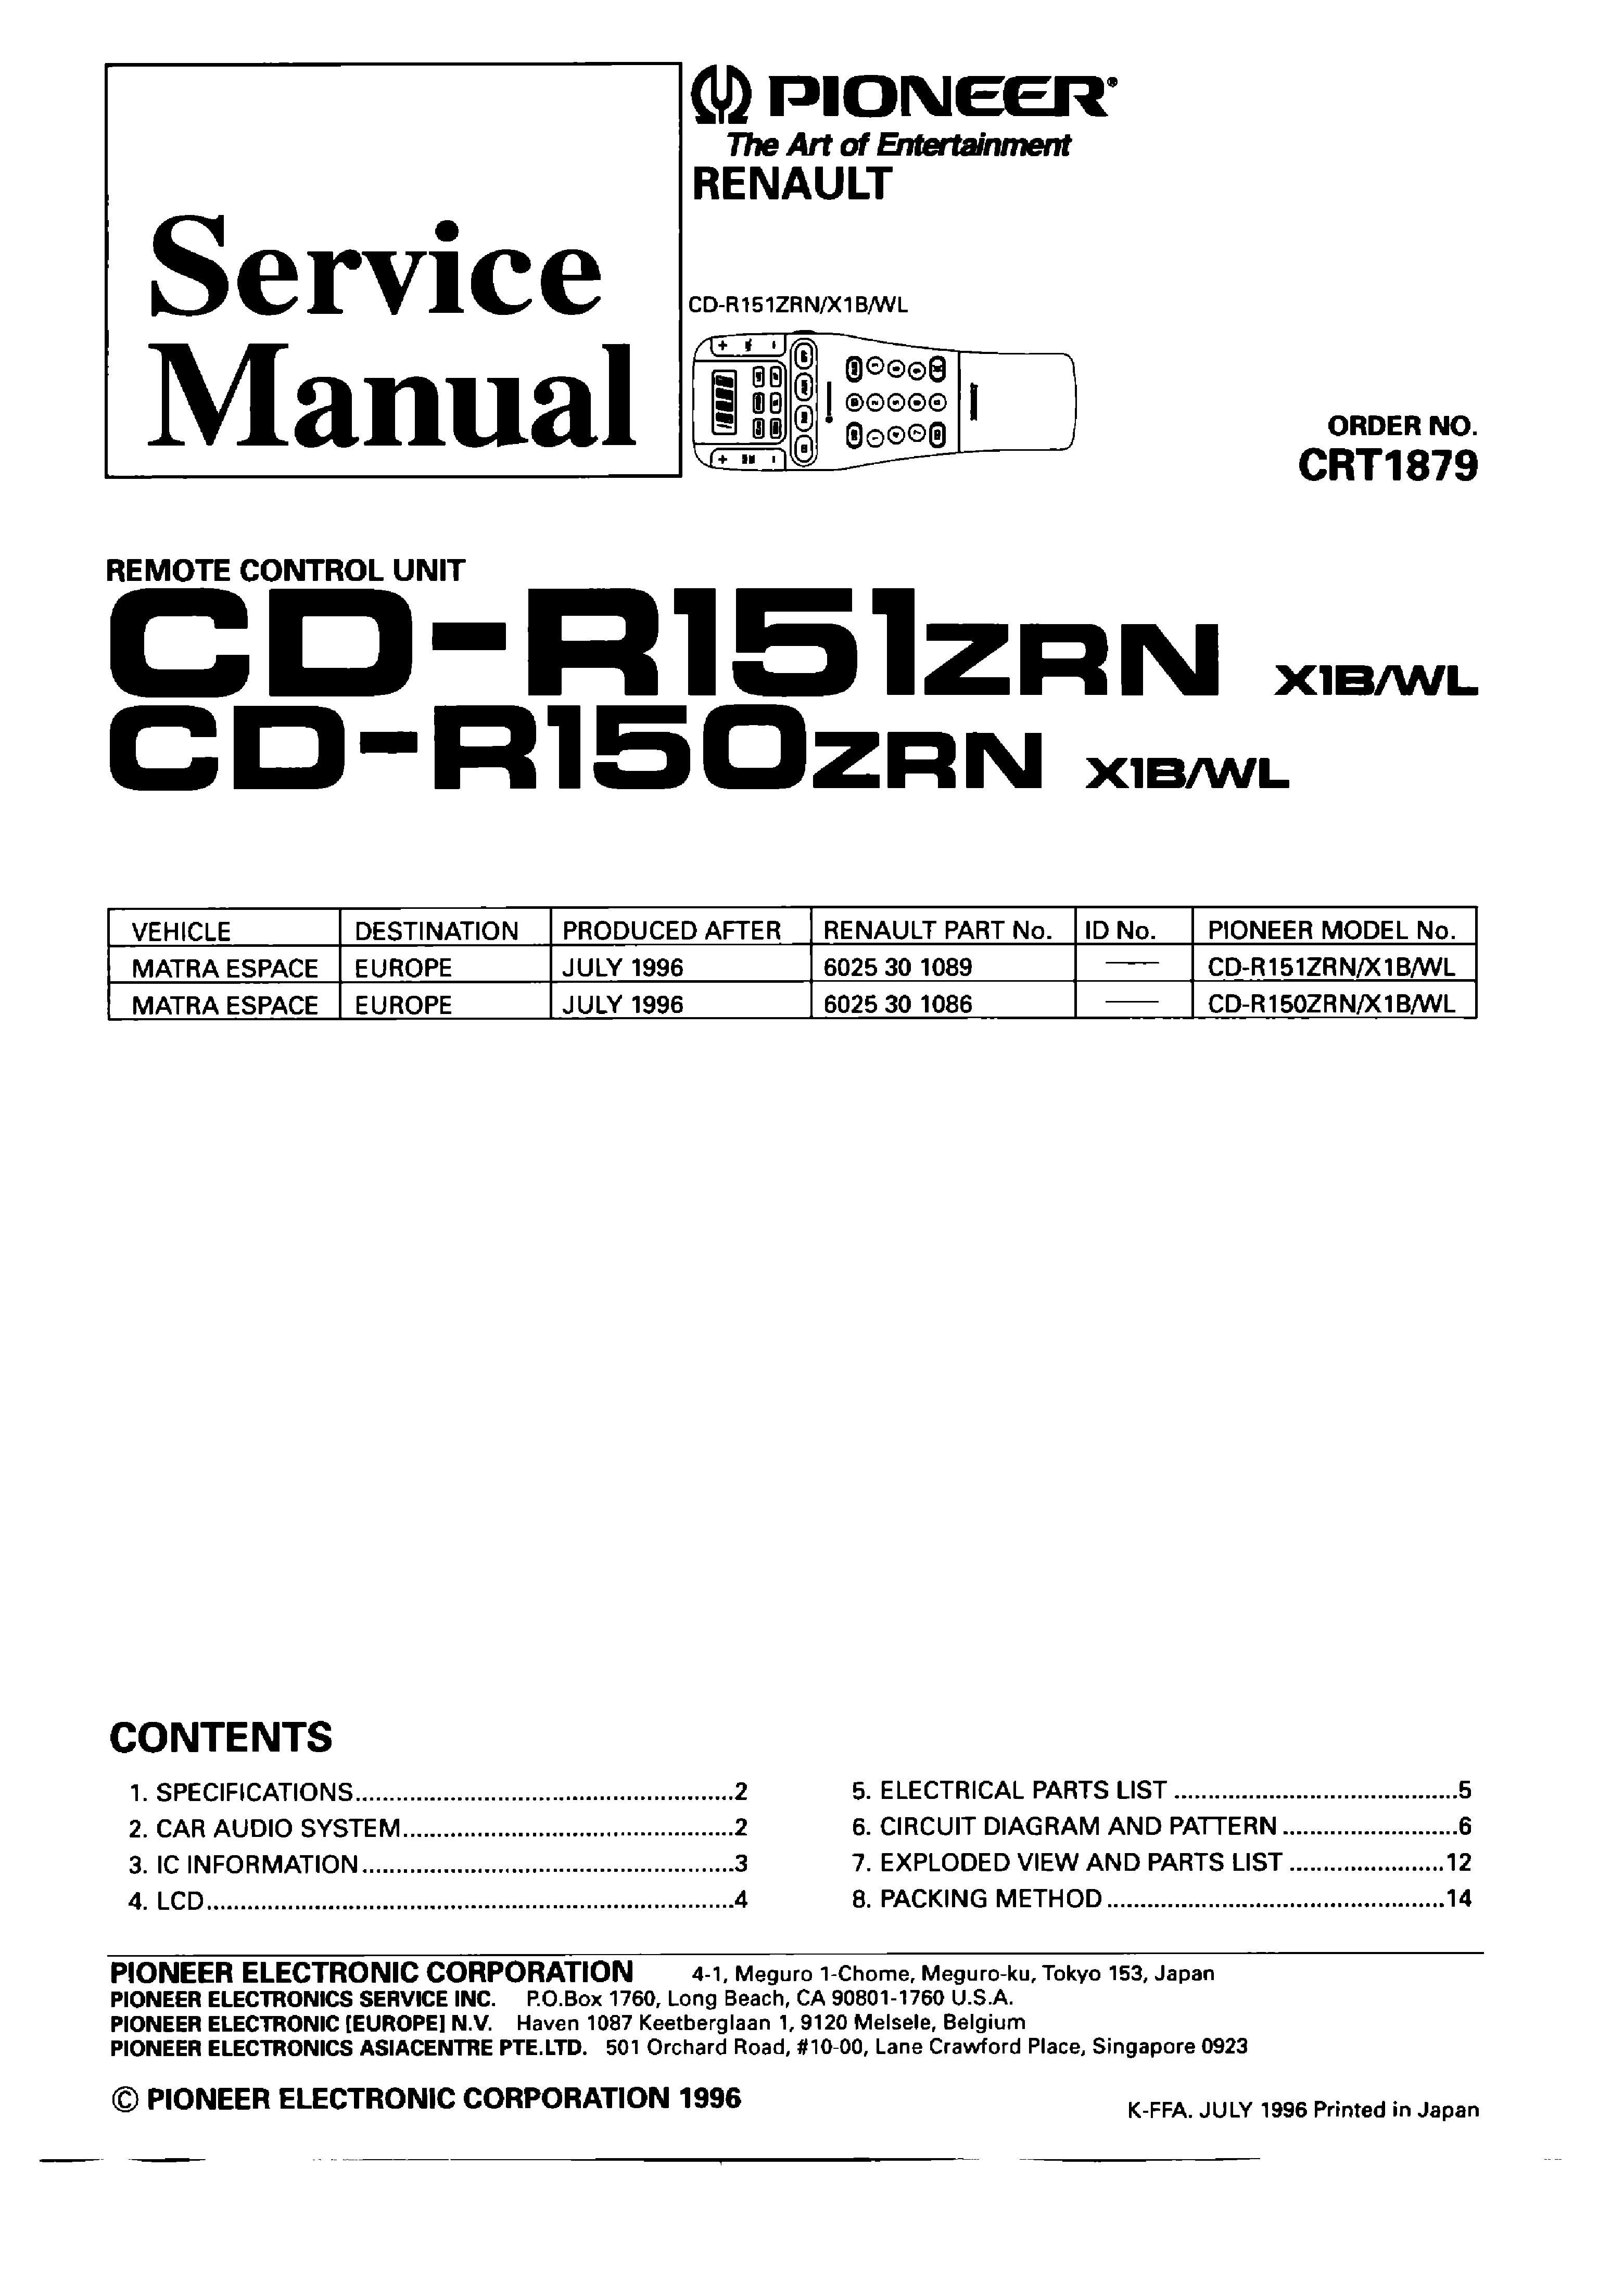 PIONEER CD-R150-151 service manual (1st page)